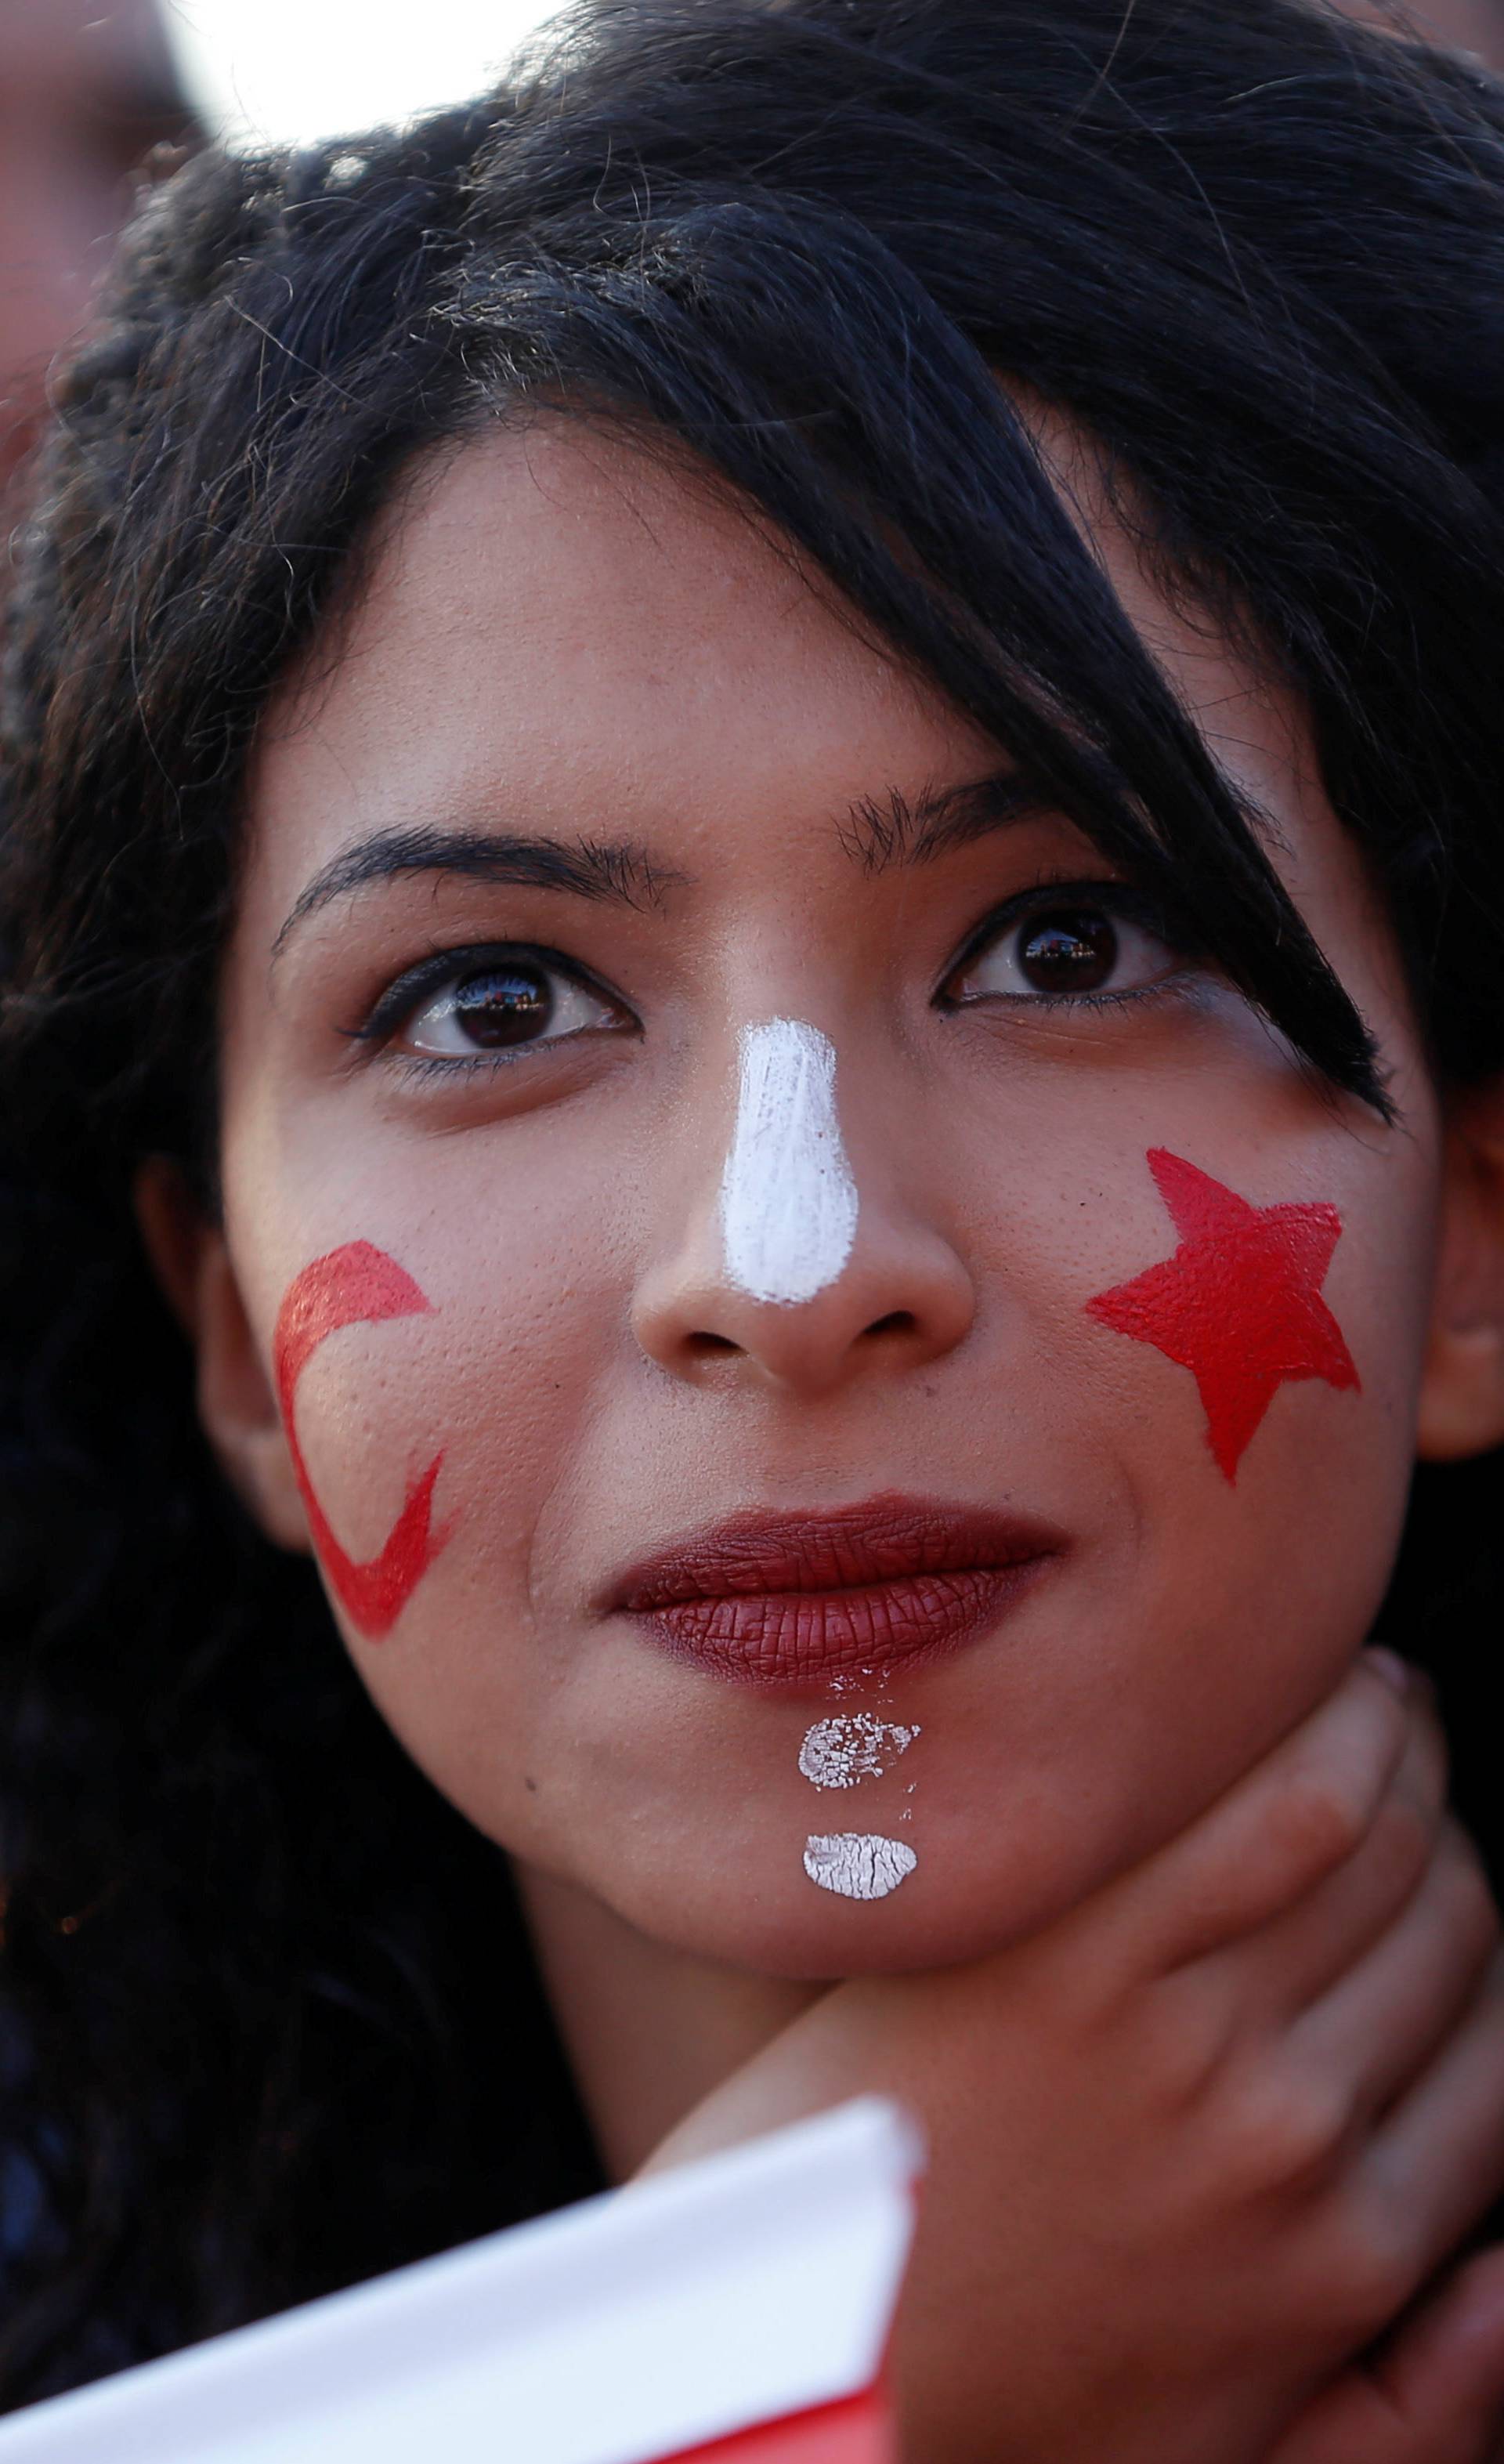 Fans react as they watch the broadcast of the FIFA World Cup Group G soccer match between Tunisia and England, in Tunis